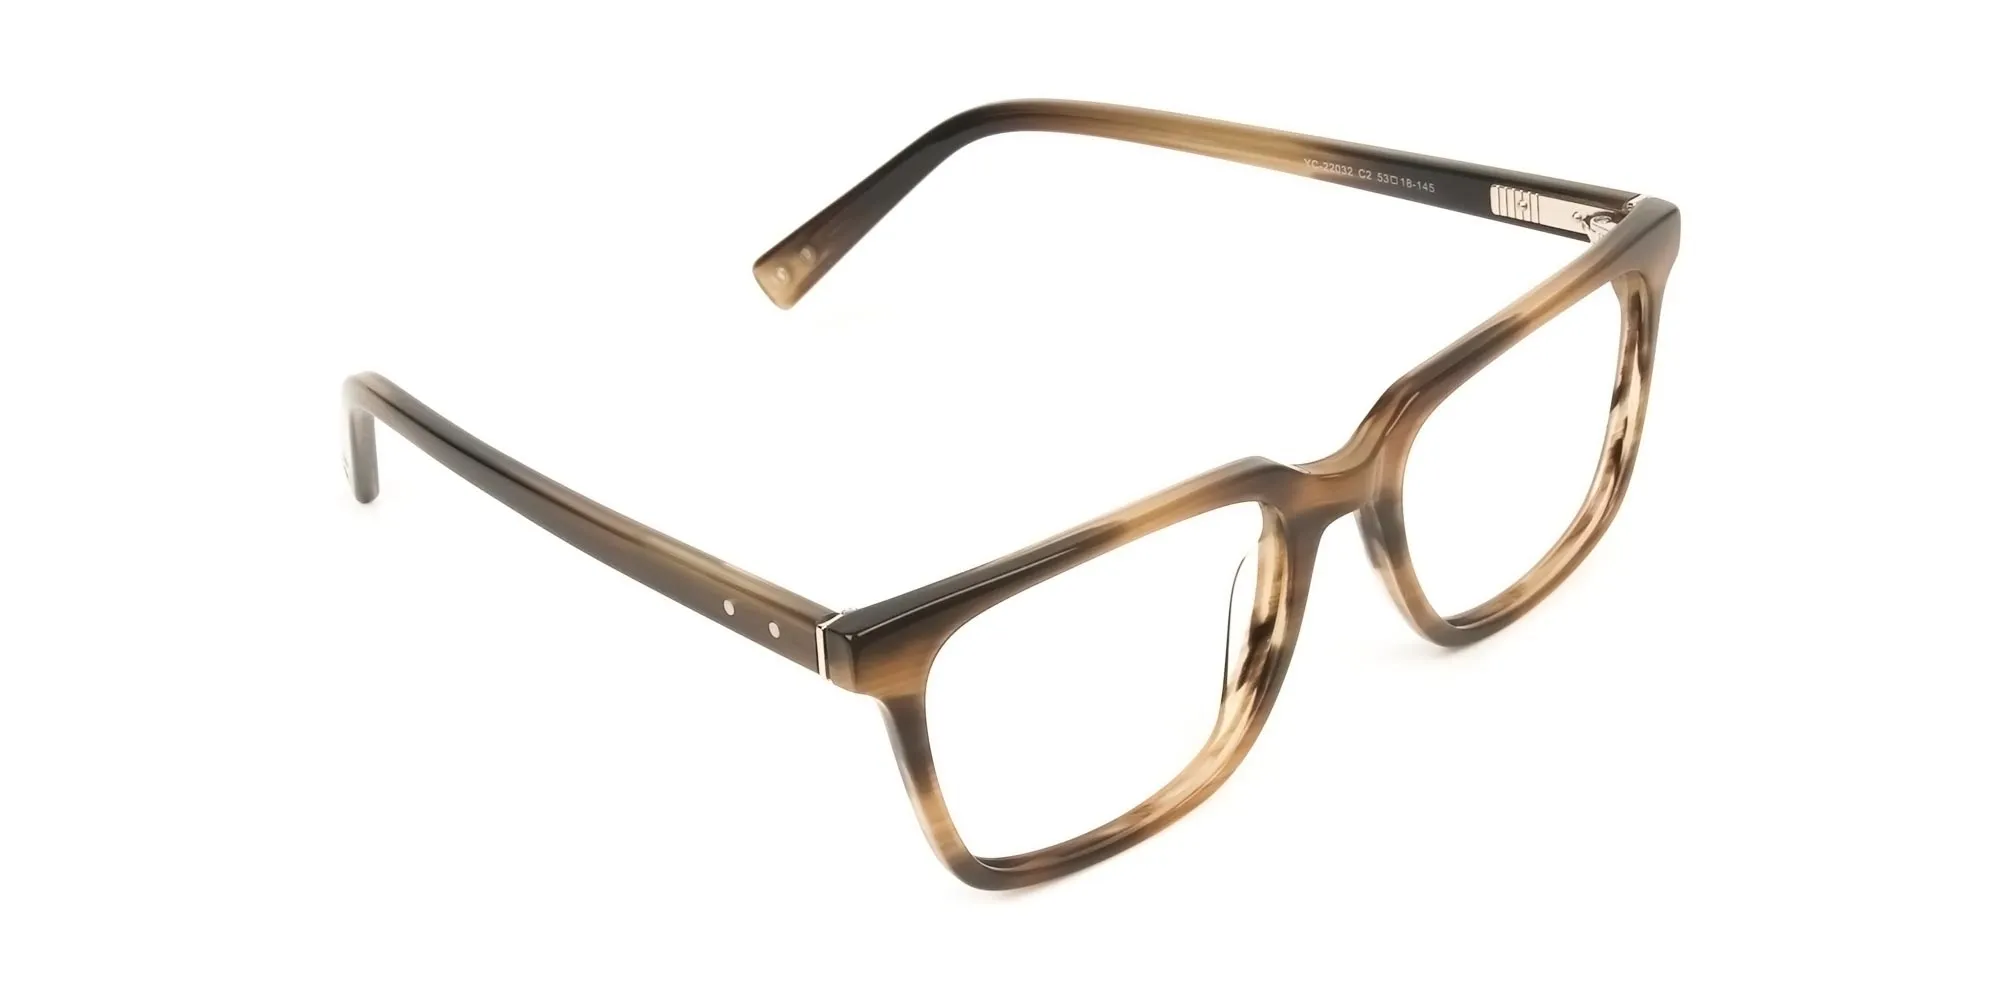 Handcrafted Stripe Brown Thick Acetate Glasses in Rectangular - 2